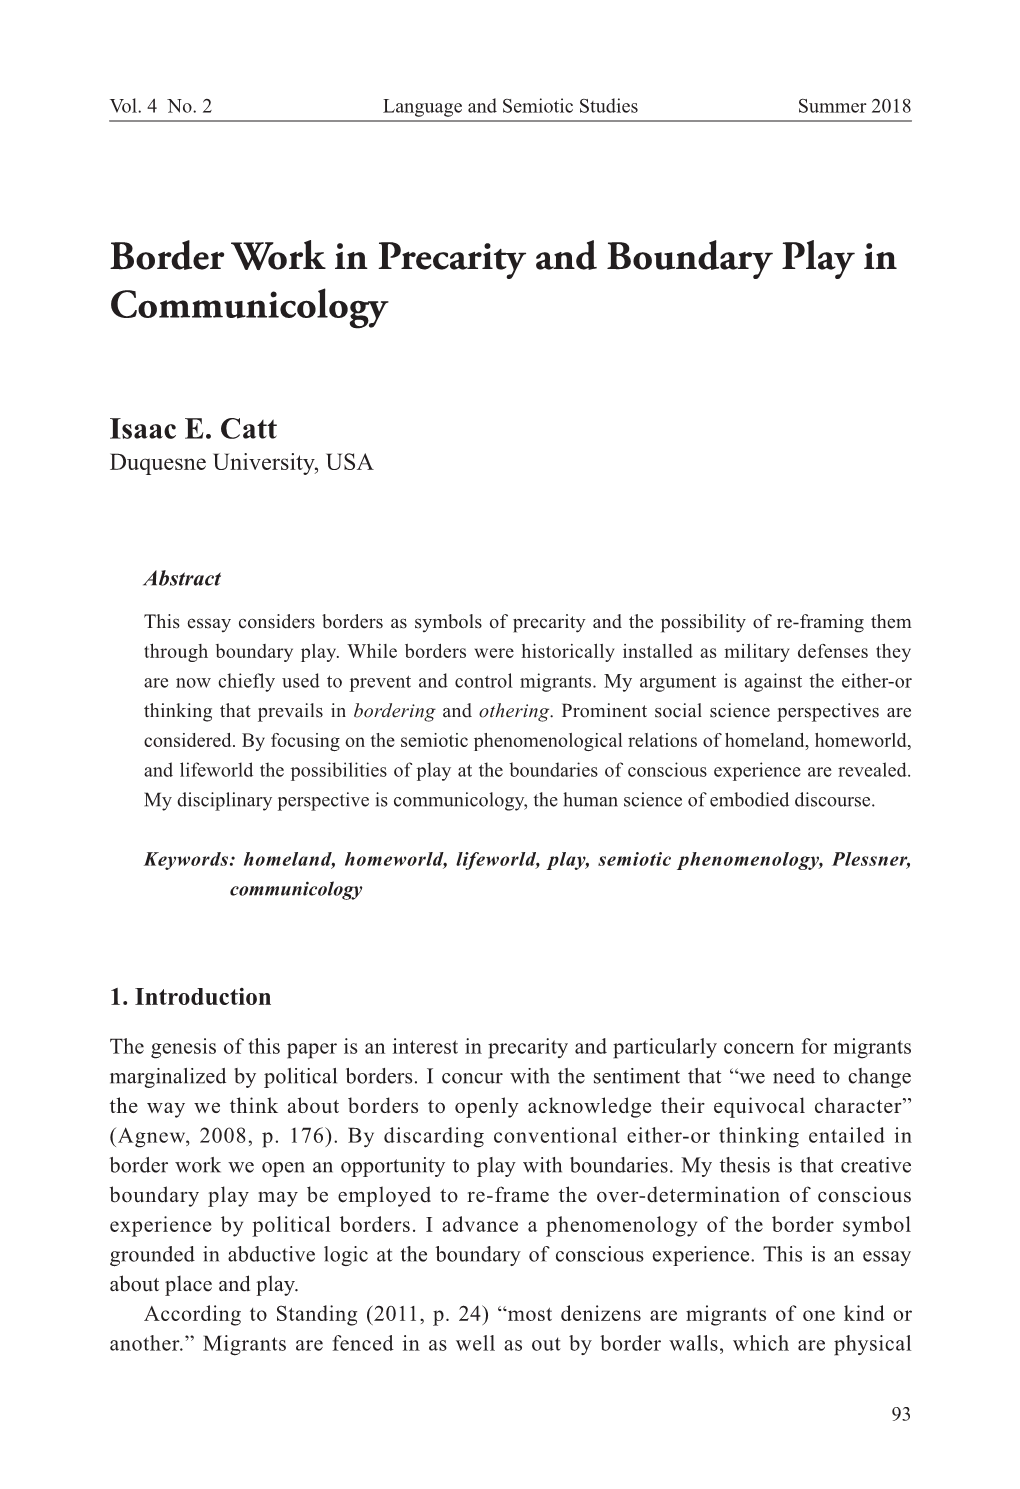 Border Work in Precarity and Boundary Play in Communicology